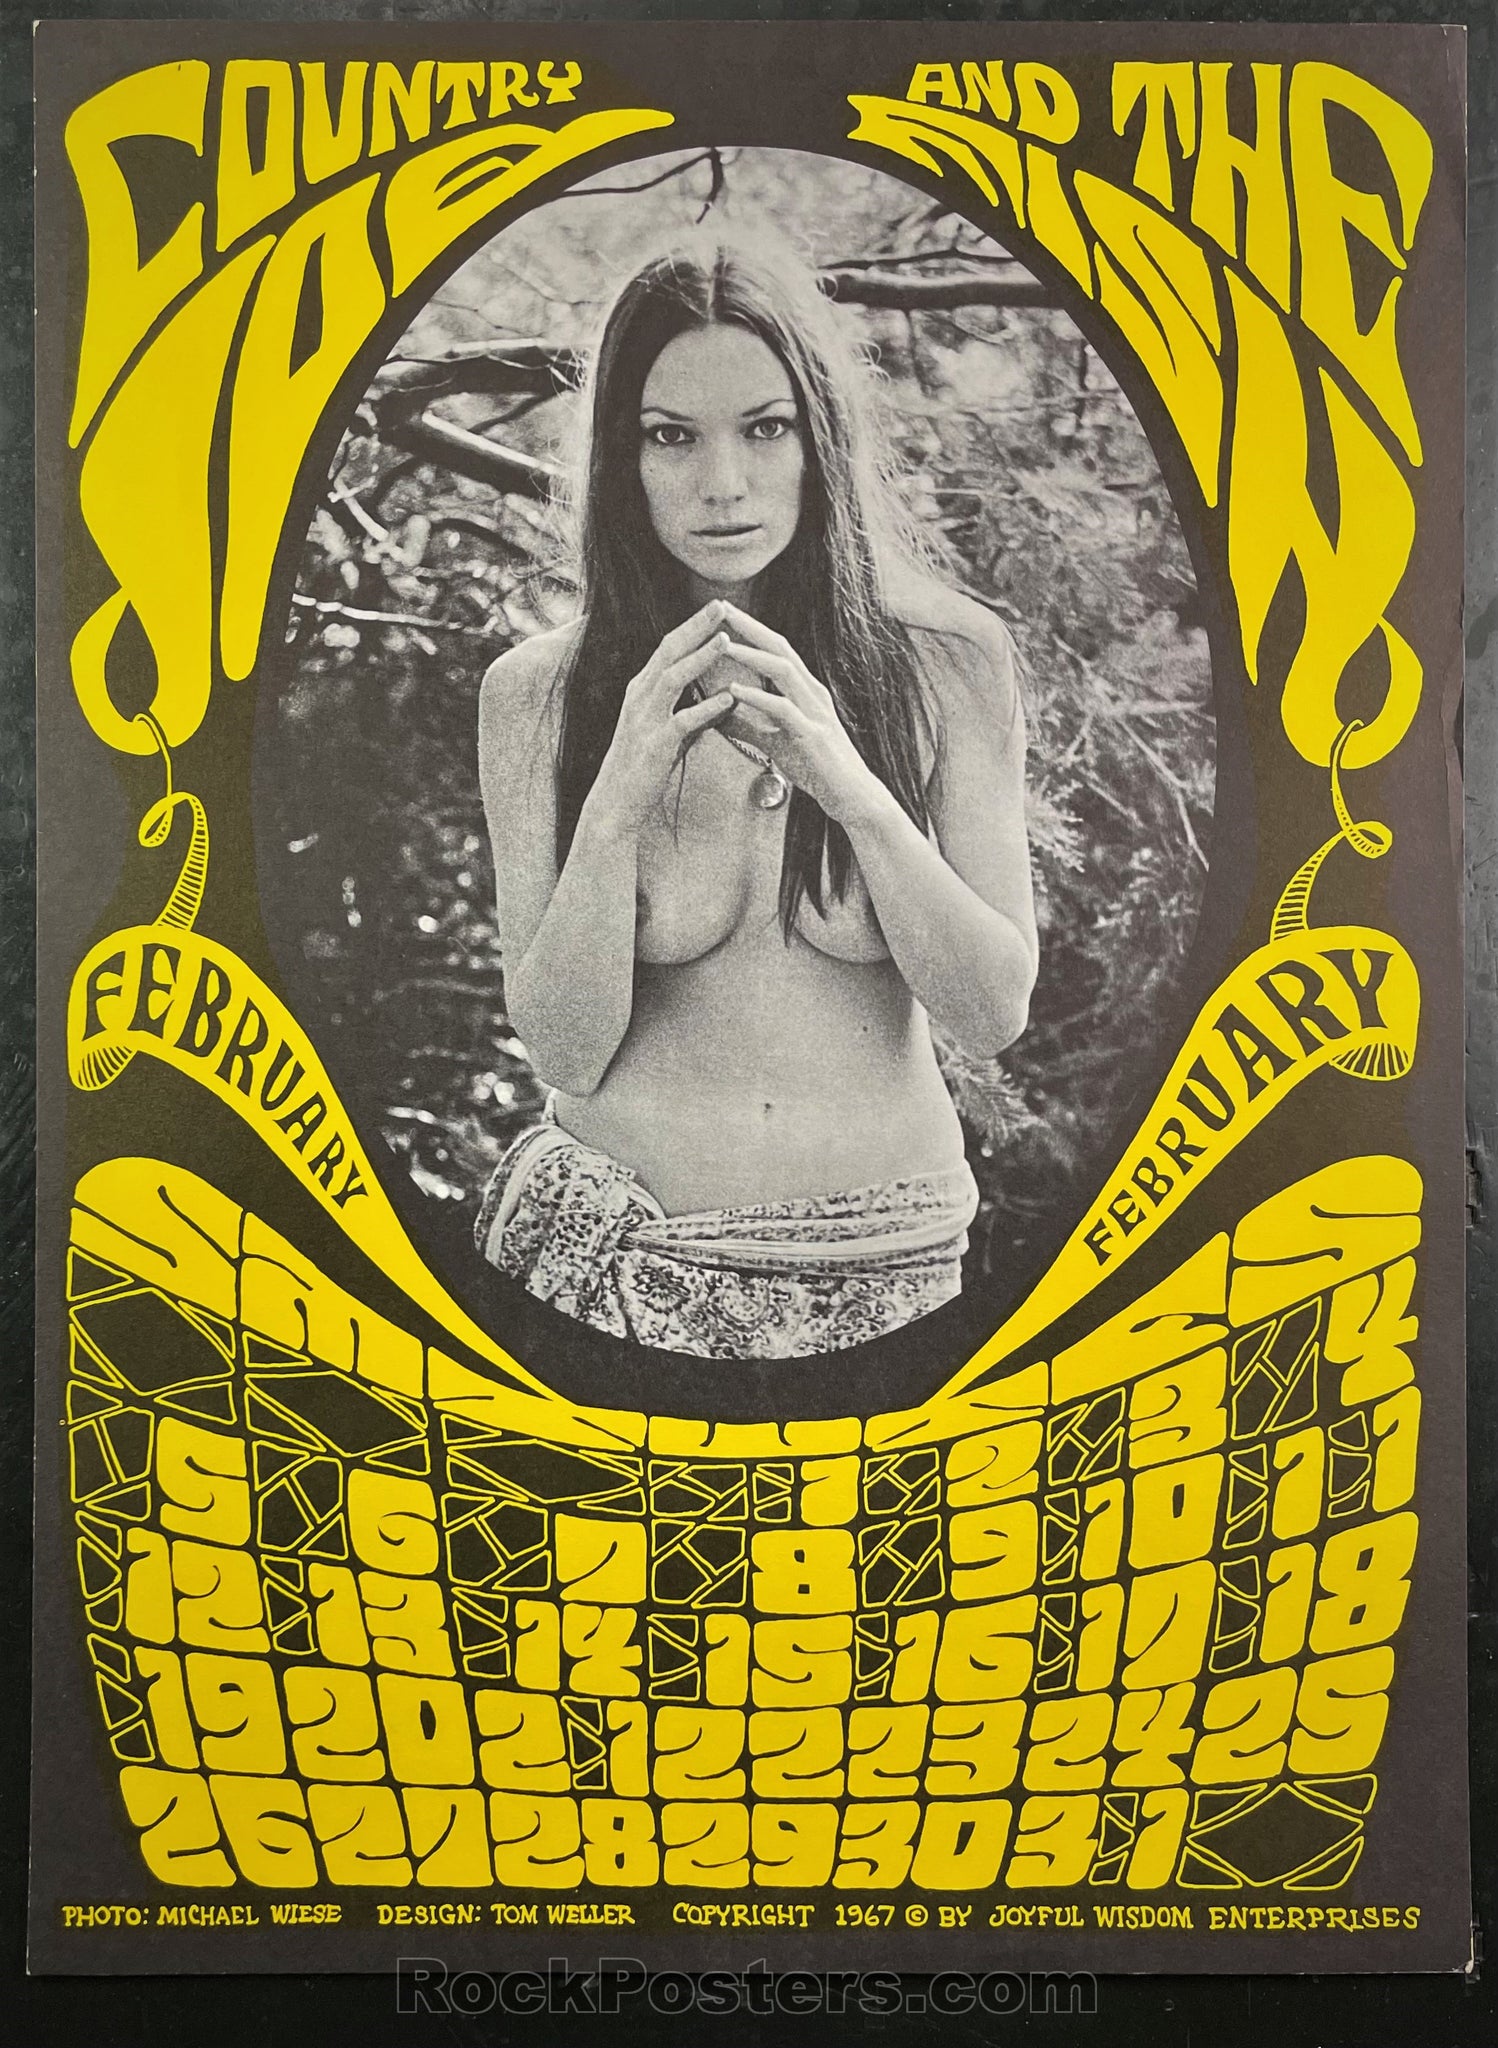 AUCTION - AOR-2.280 - Country Joe & the Fish - Tom Weller Calendar - 1967 Poster - Excellent